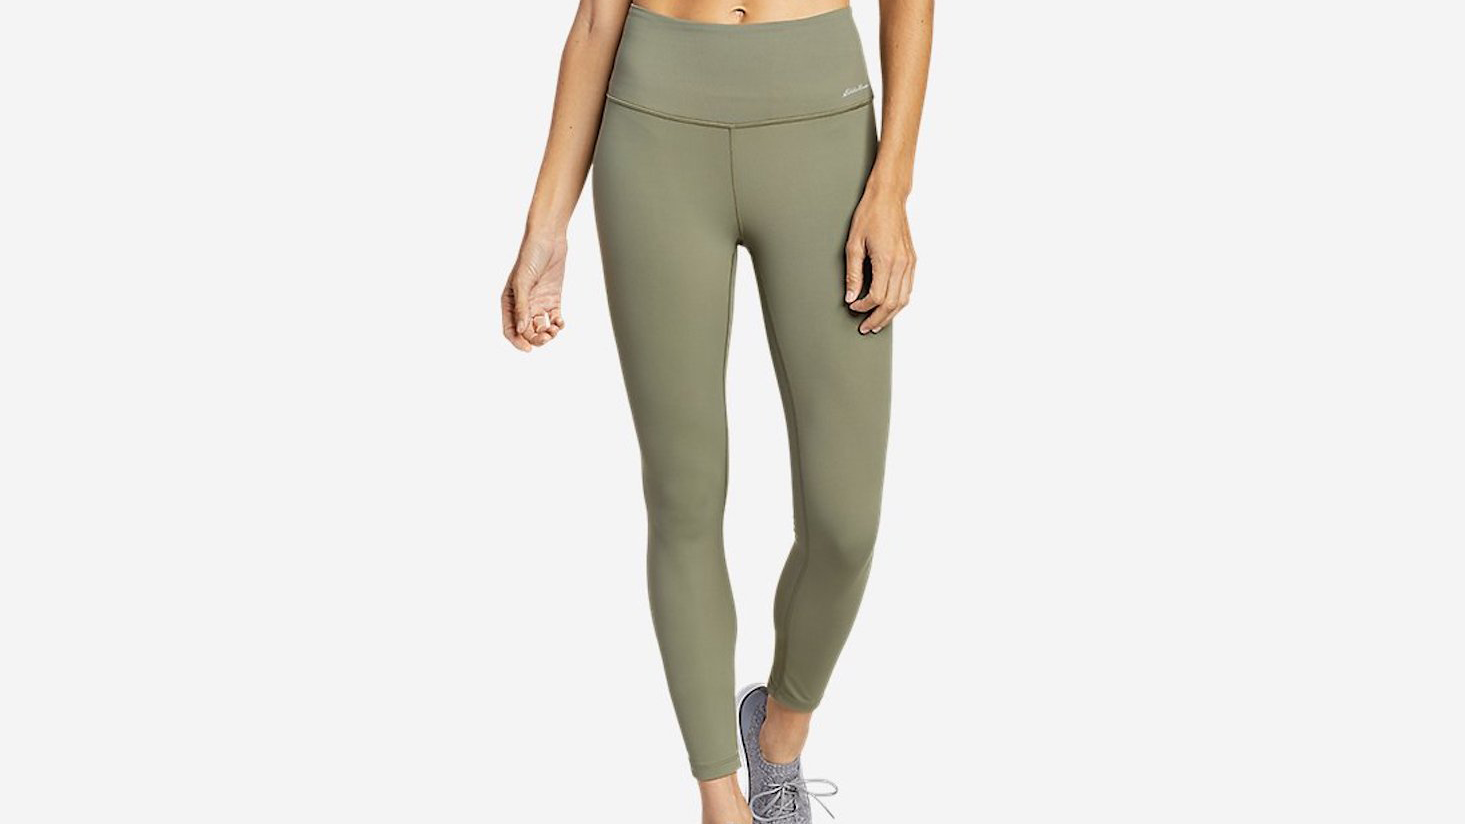 These New Eddie Bauer Leggings Feature UPF 50+ Protection